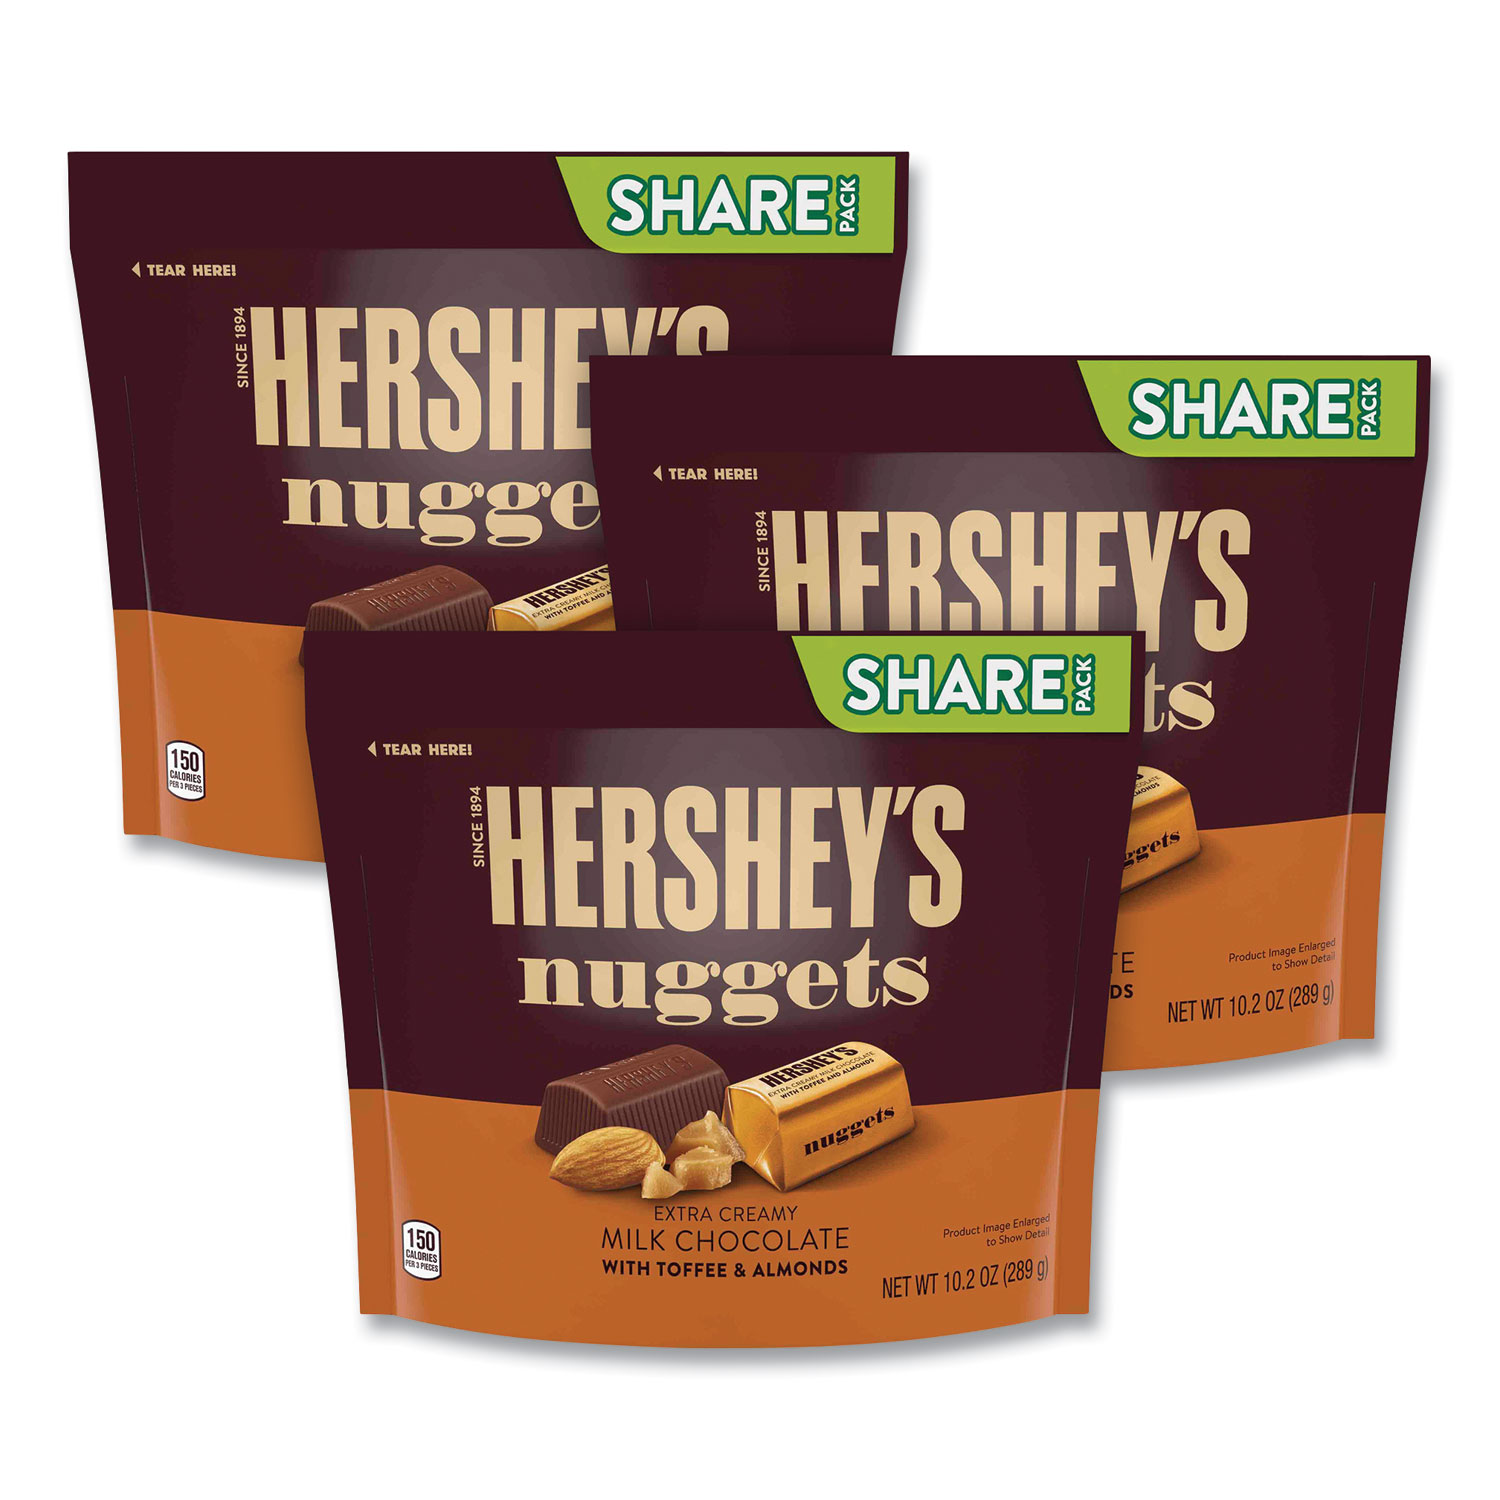  Hershey's 1875 Nuggets Share Pack, Milk Chocolate with Toffee and Almonds, 10.2 oz Bag, 3/Pack, Free Delivery in 1-4 Business Days (GRR24600445) 